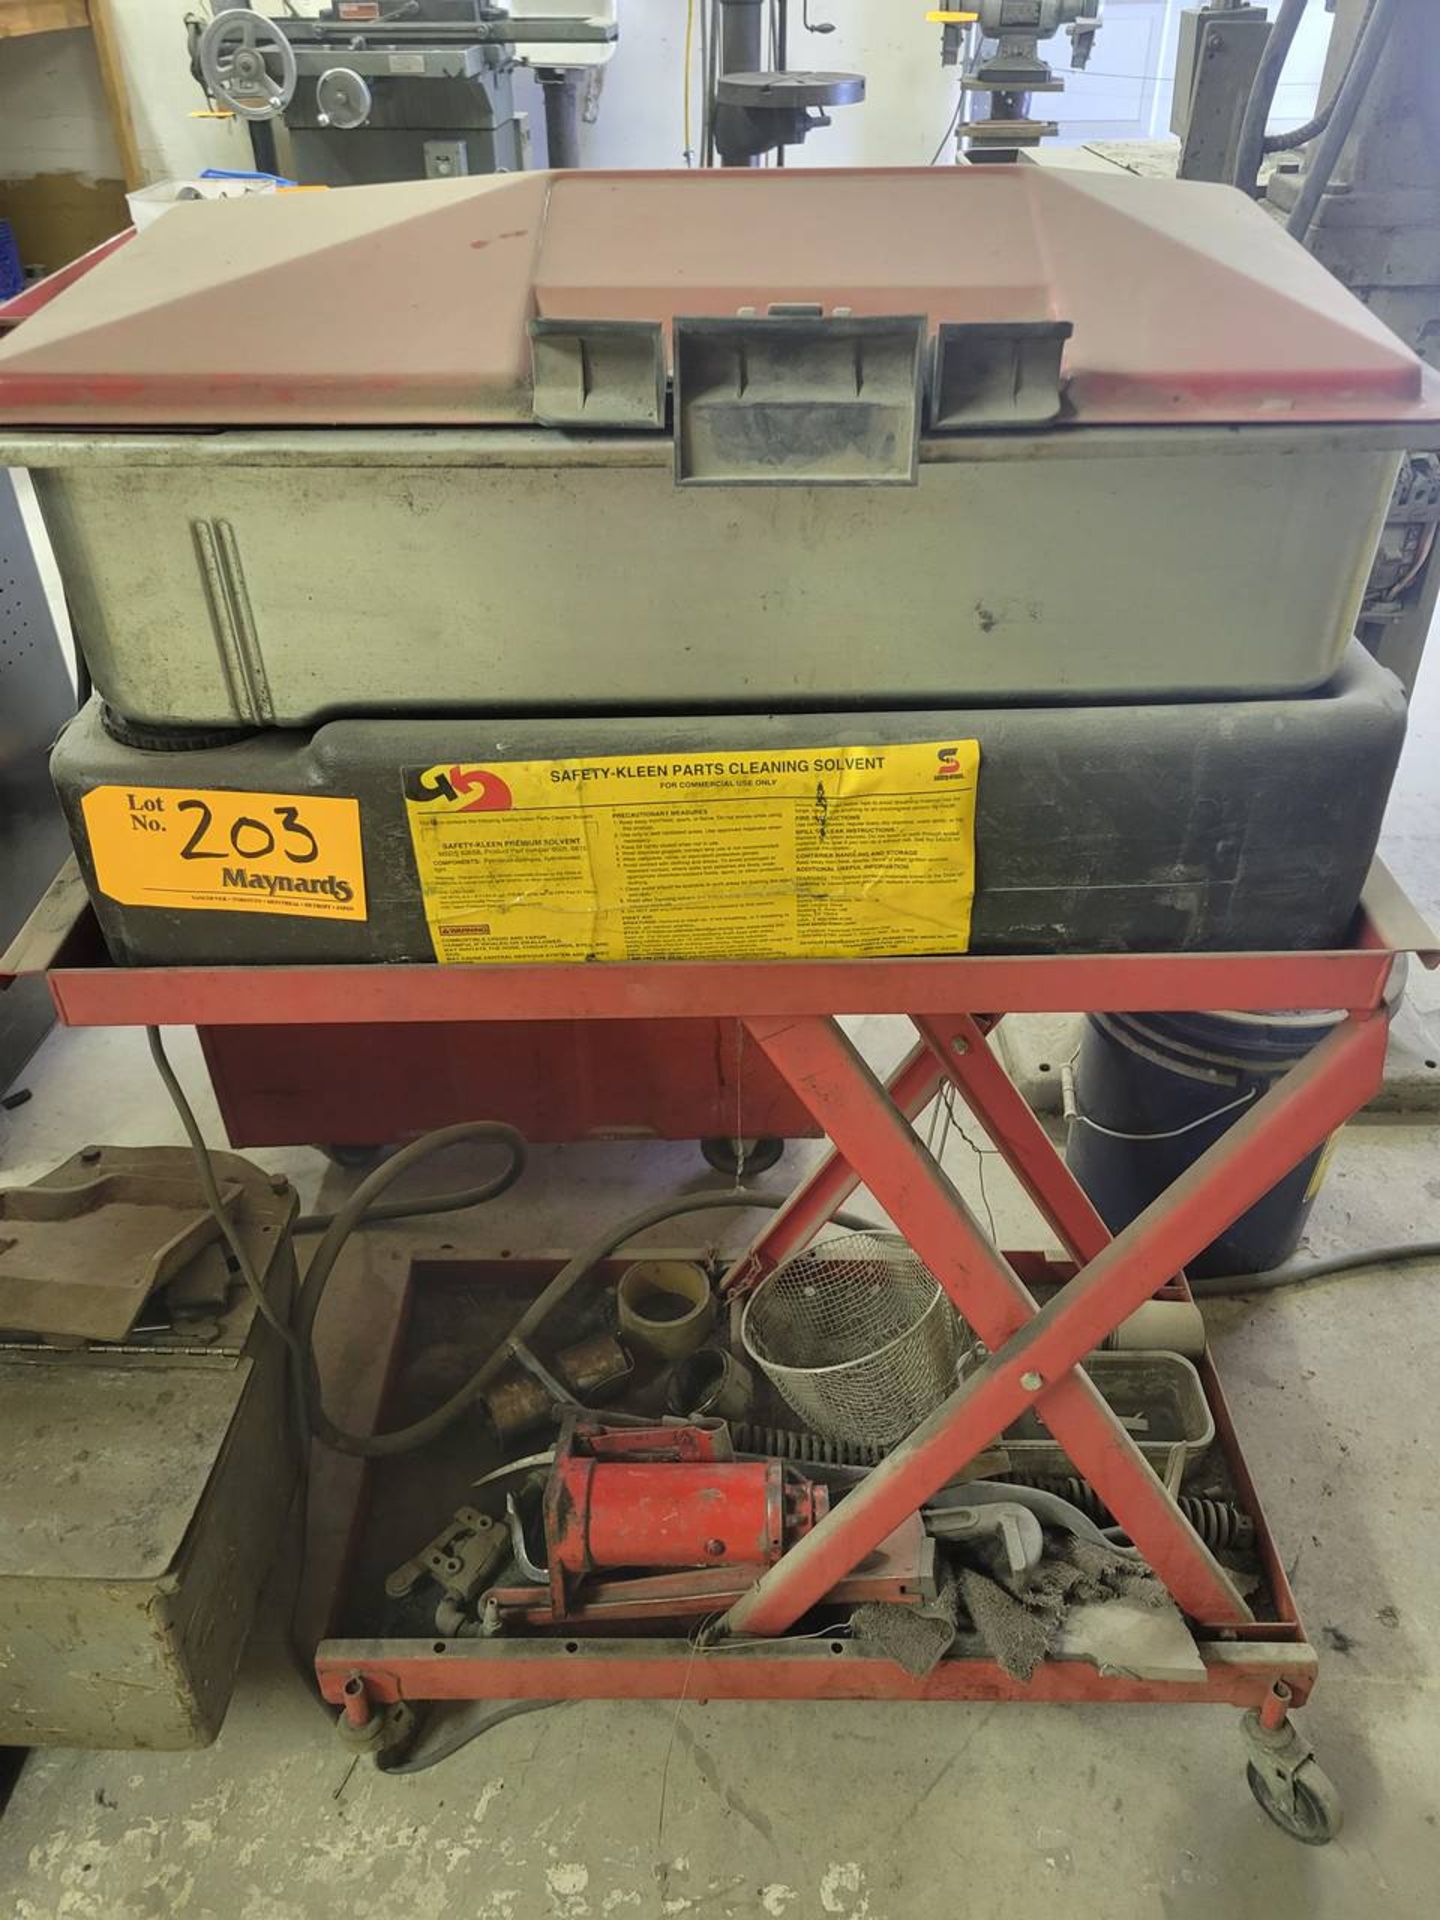 Safety Kleen Rolling parts washer